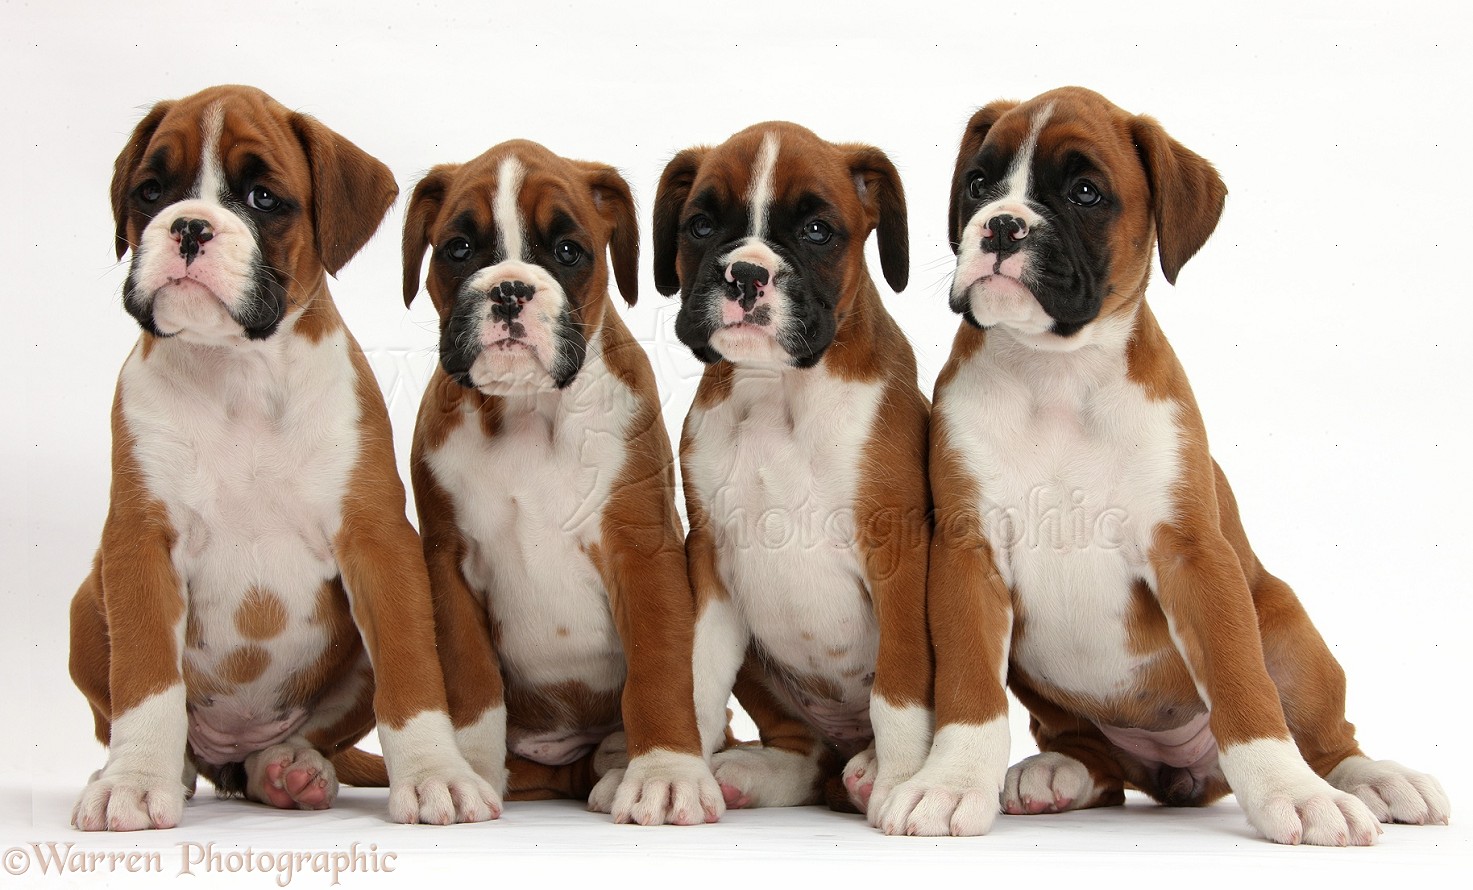 Dogs Four Boxer puppies, 8 weeks old, sitting photo WP38652